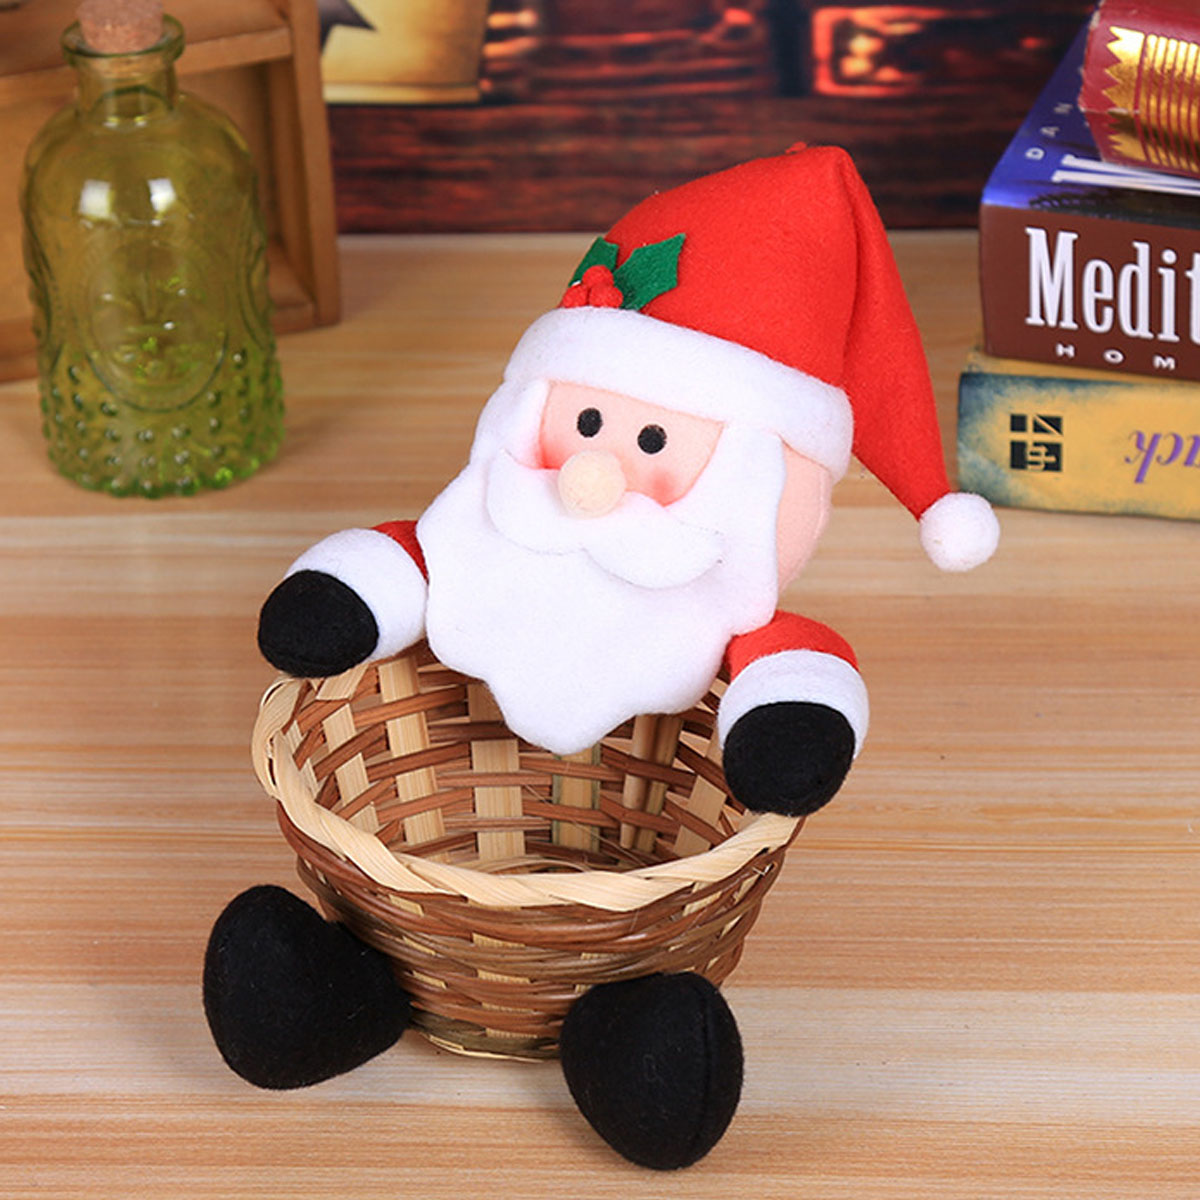 5-Types-Christmas-Candy-Storage-Basket-Santa-Claus-Home-Decorations-Ornaments-1477556-3